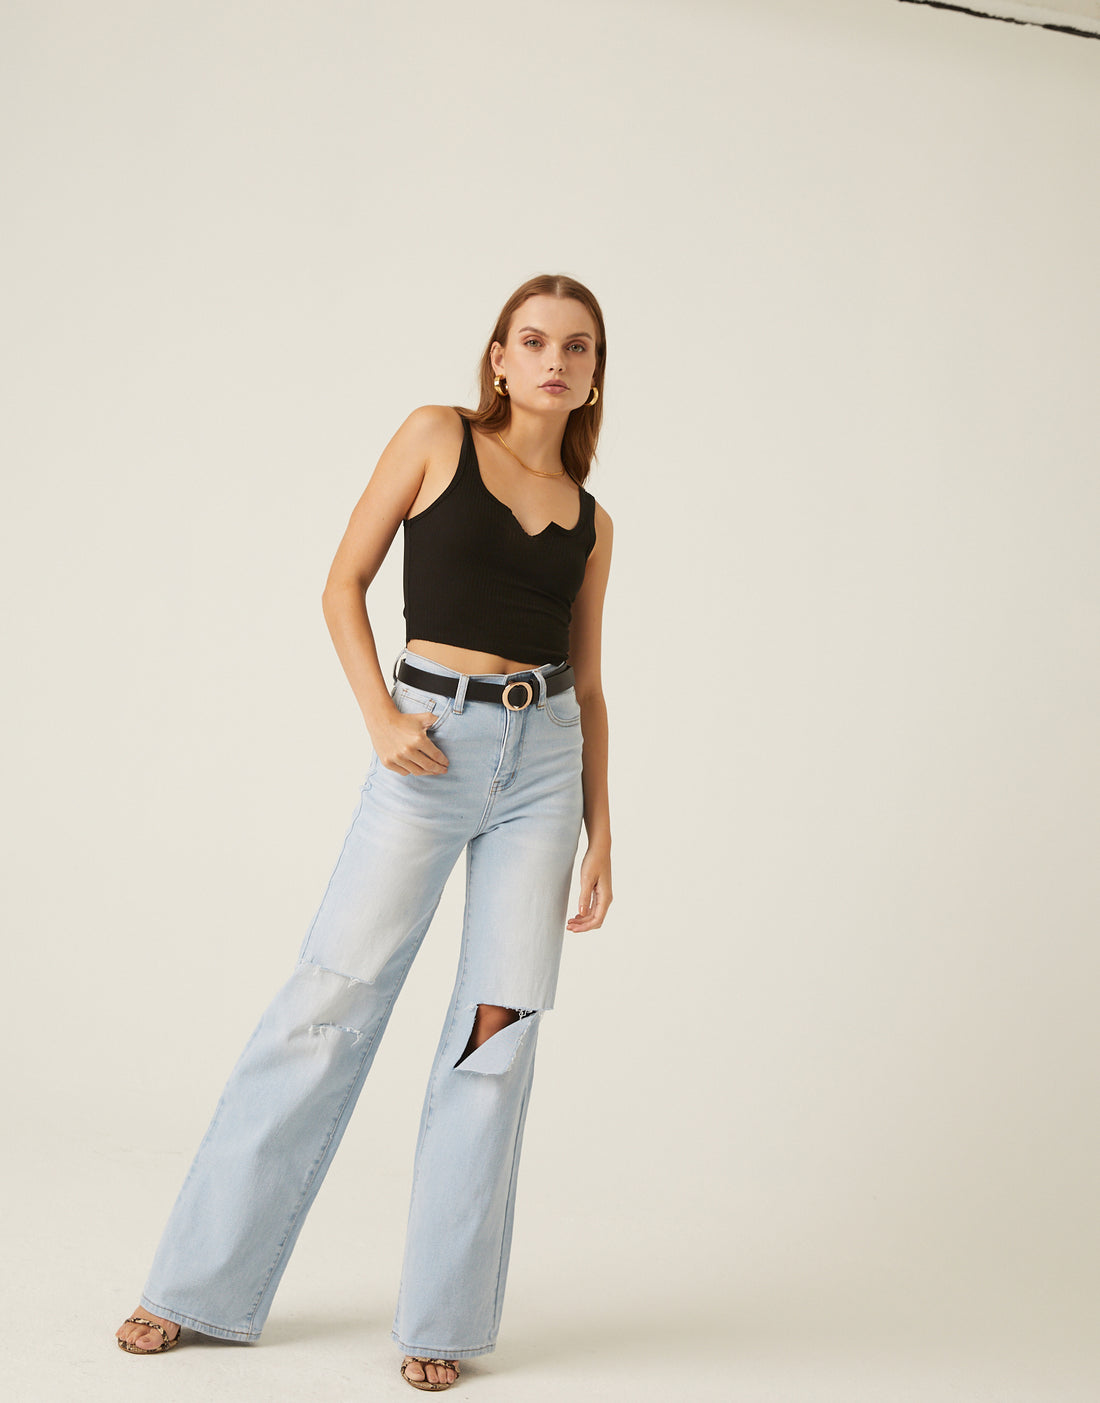 Wide Leg Distressed Jeans Bottoms -2020AVE